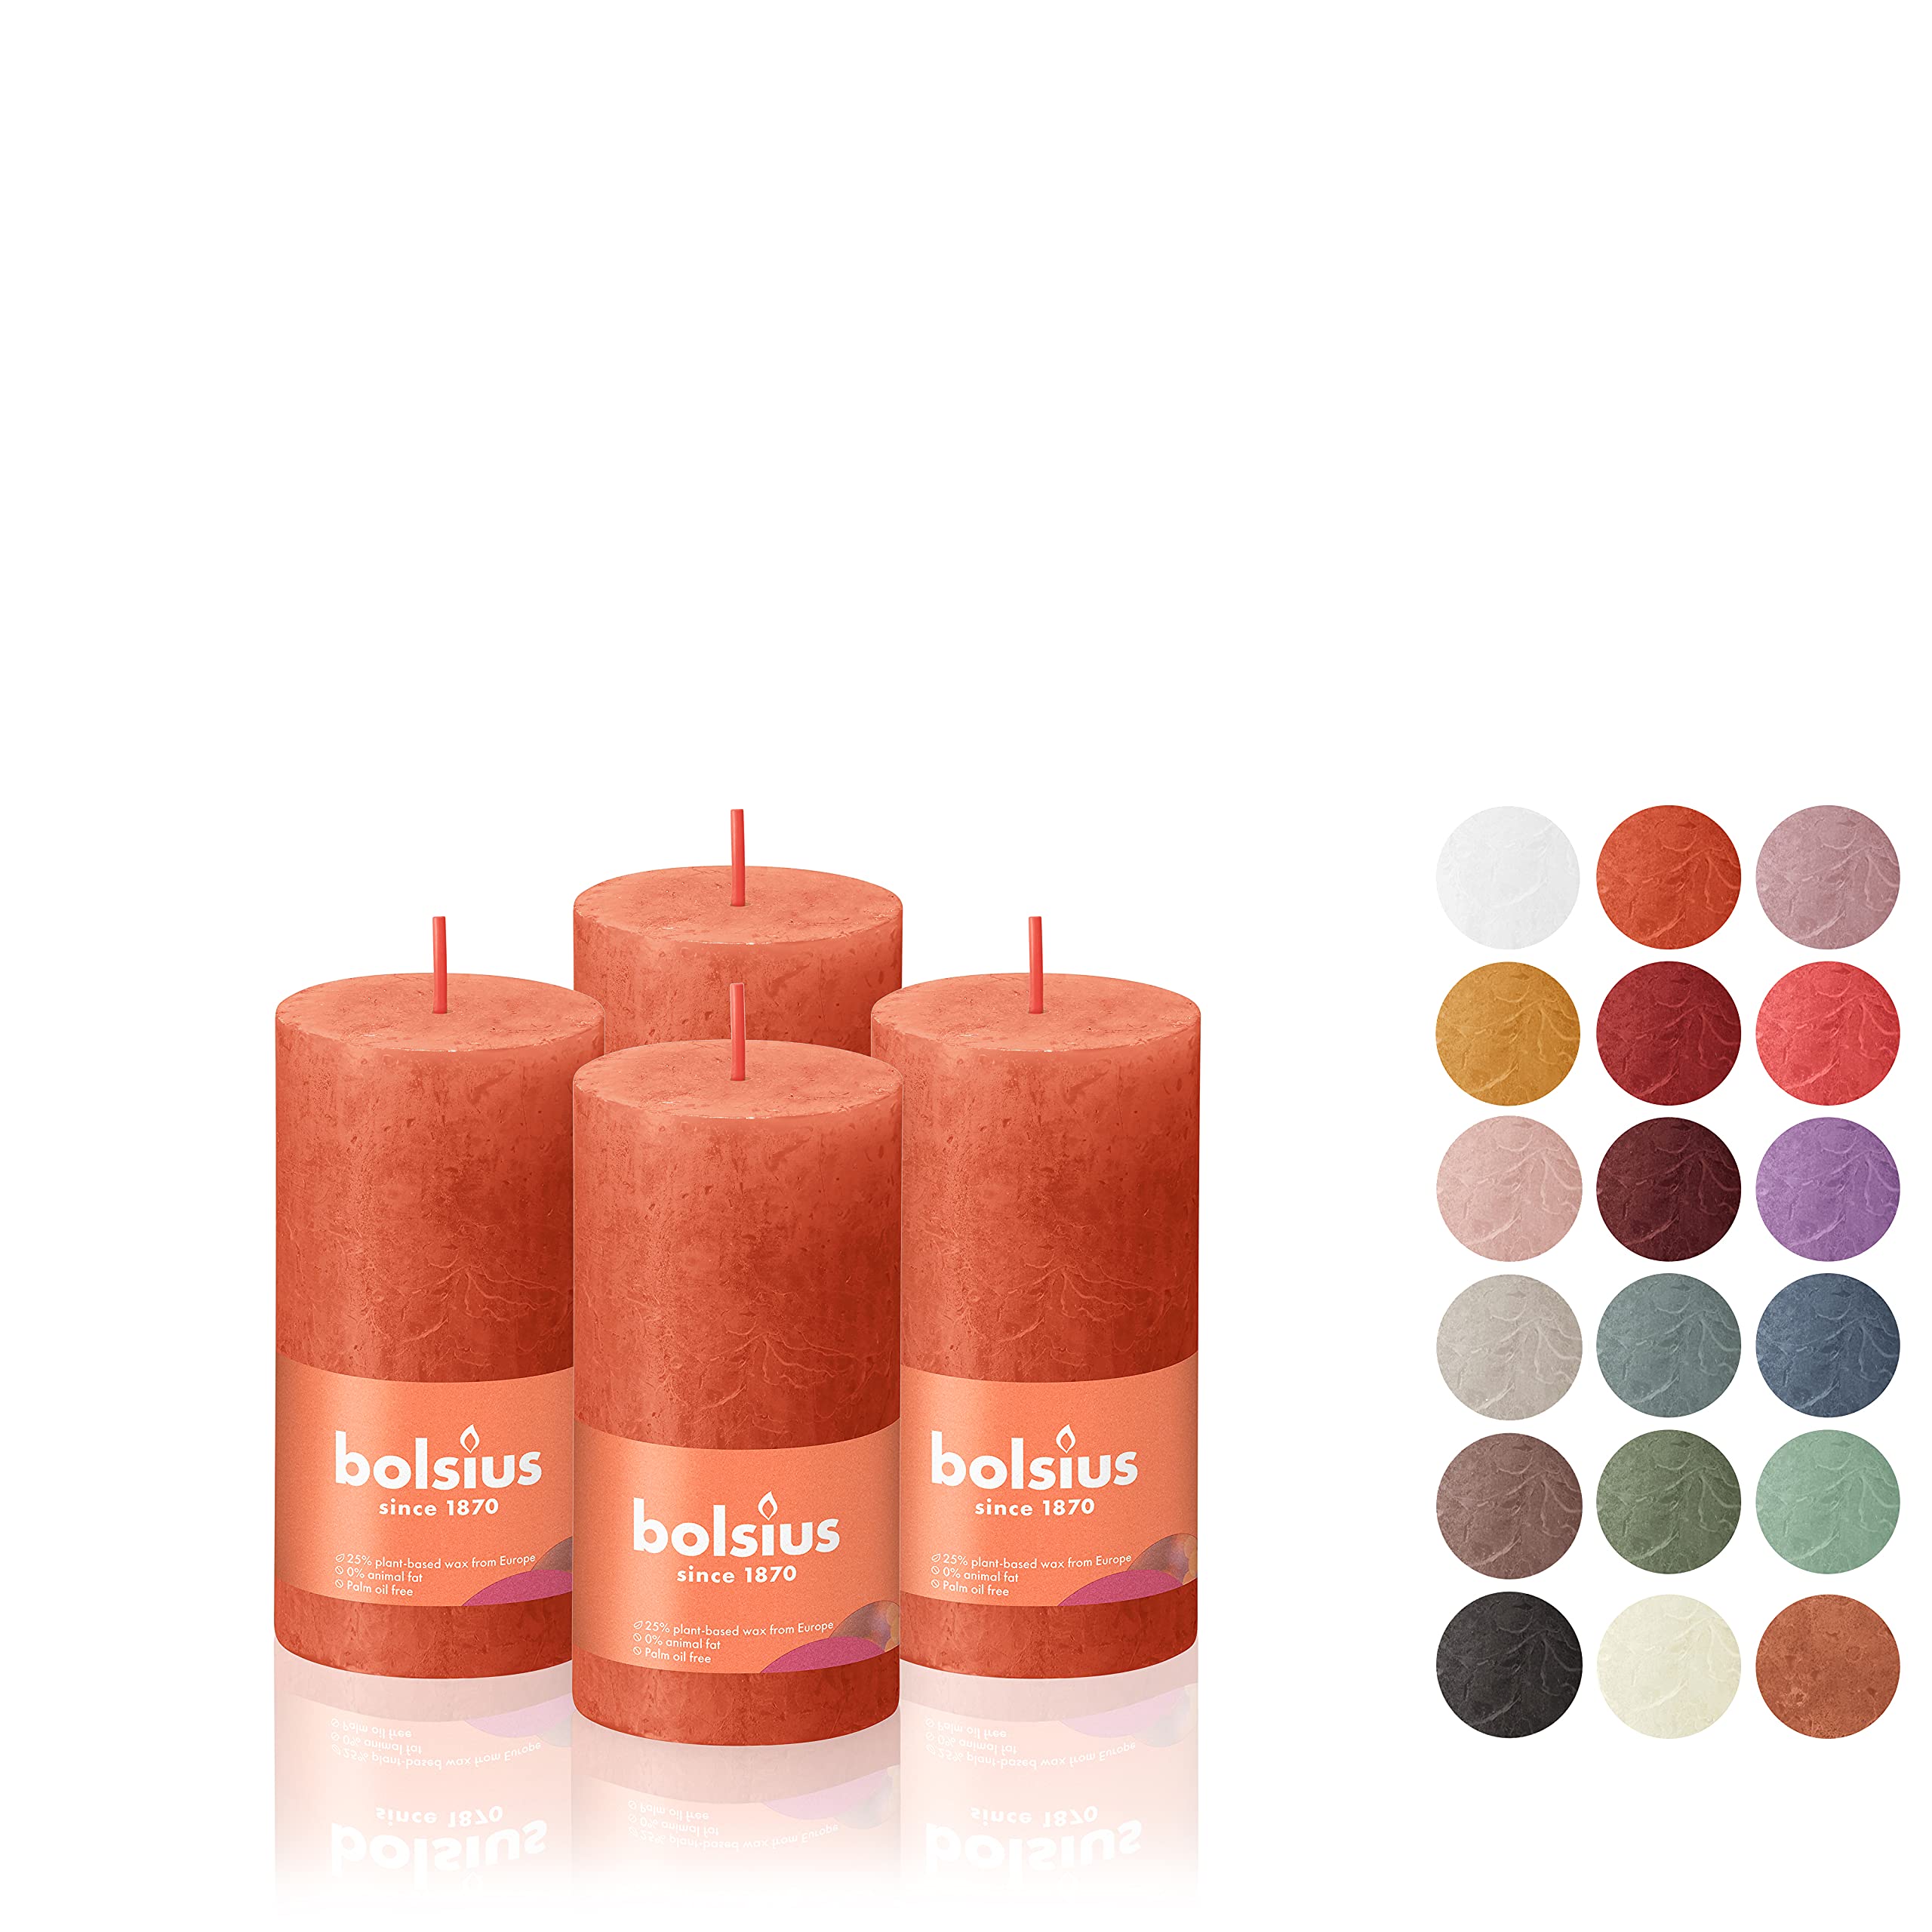 BOLSIUS 4 Pack Orange Rustic Pillar Candles - 2 X 4 Inches - Premium European Quality - Includes Natural Plant-Based Wax - Unscented Dripless Smokeless 30 Hour Party D�cor and Wedding Candles  - Acceptable